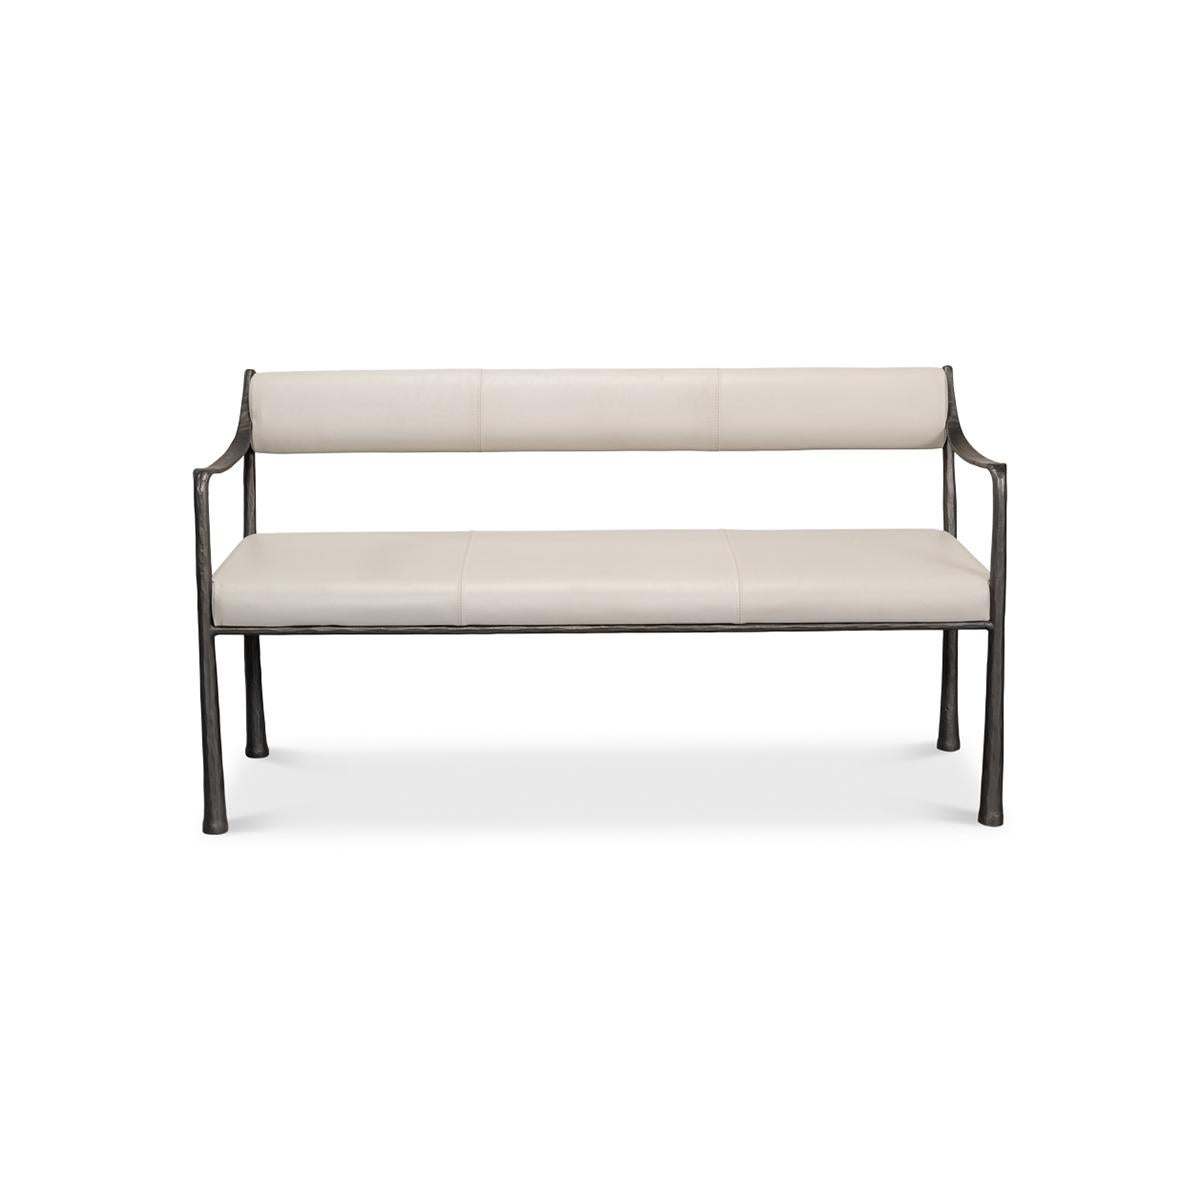 Industrial modern bench with a hand-hammered iron frame in a gunmetal finish with Napa off-white leather cushions. A classic bench with a unique form.

Dimensions: 60